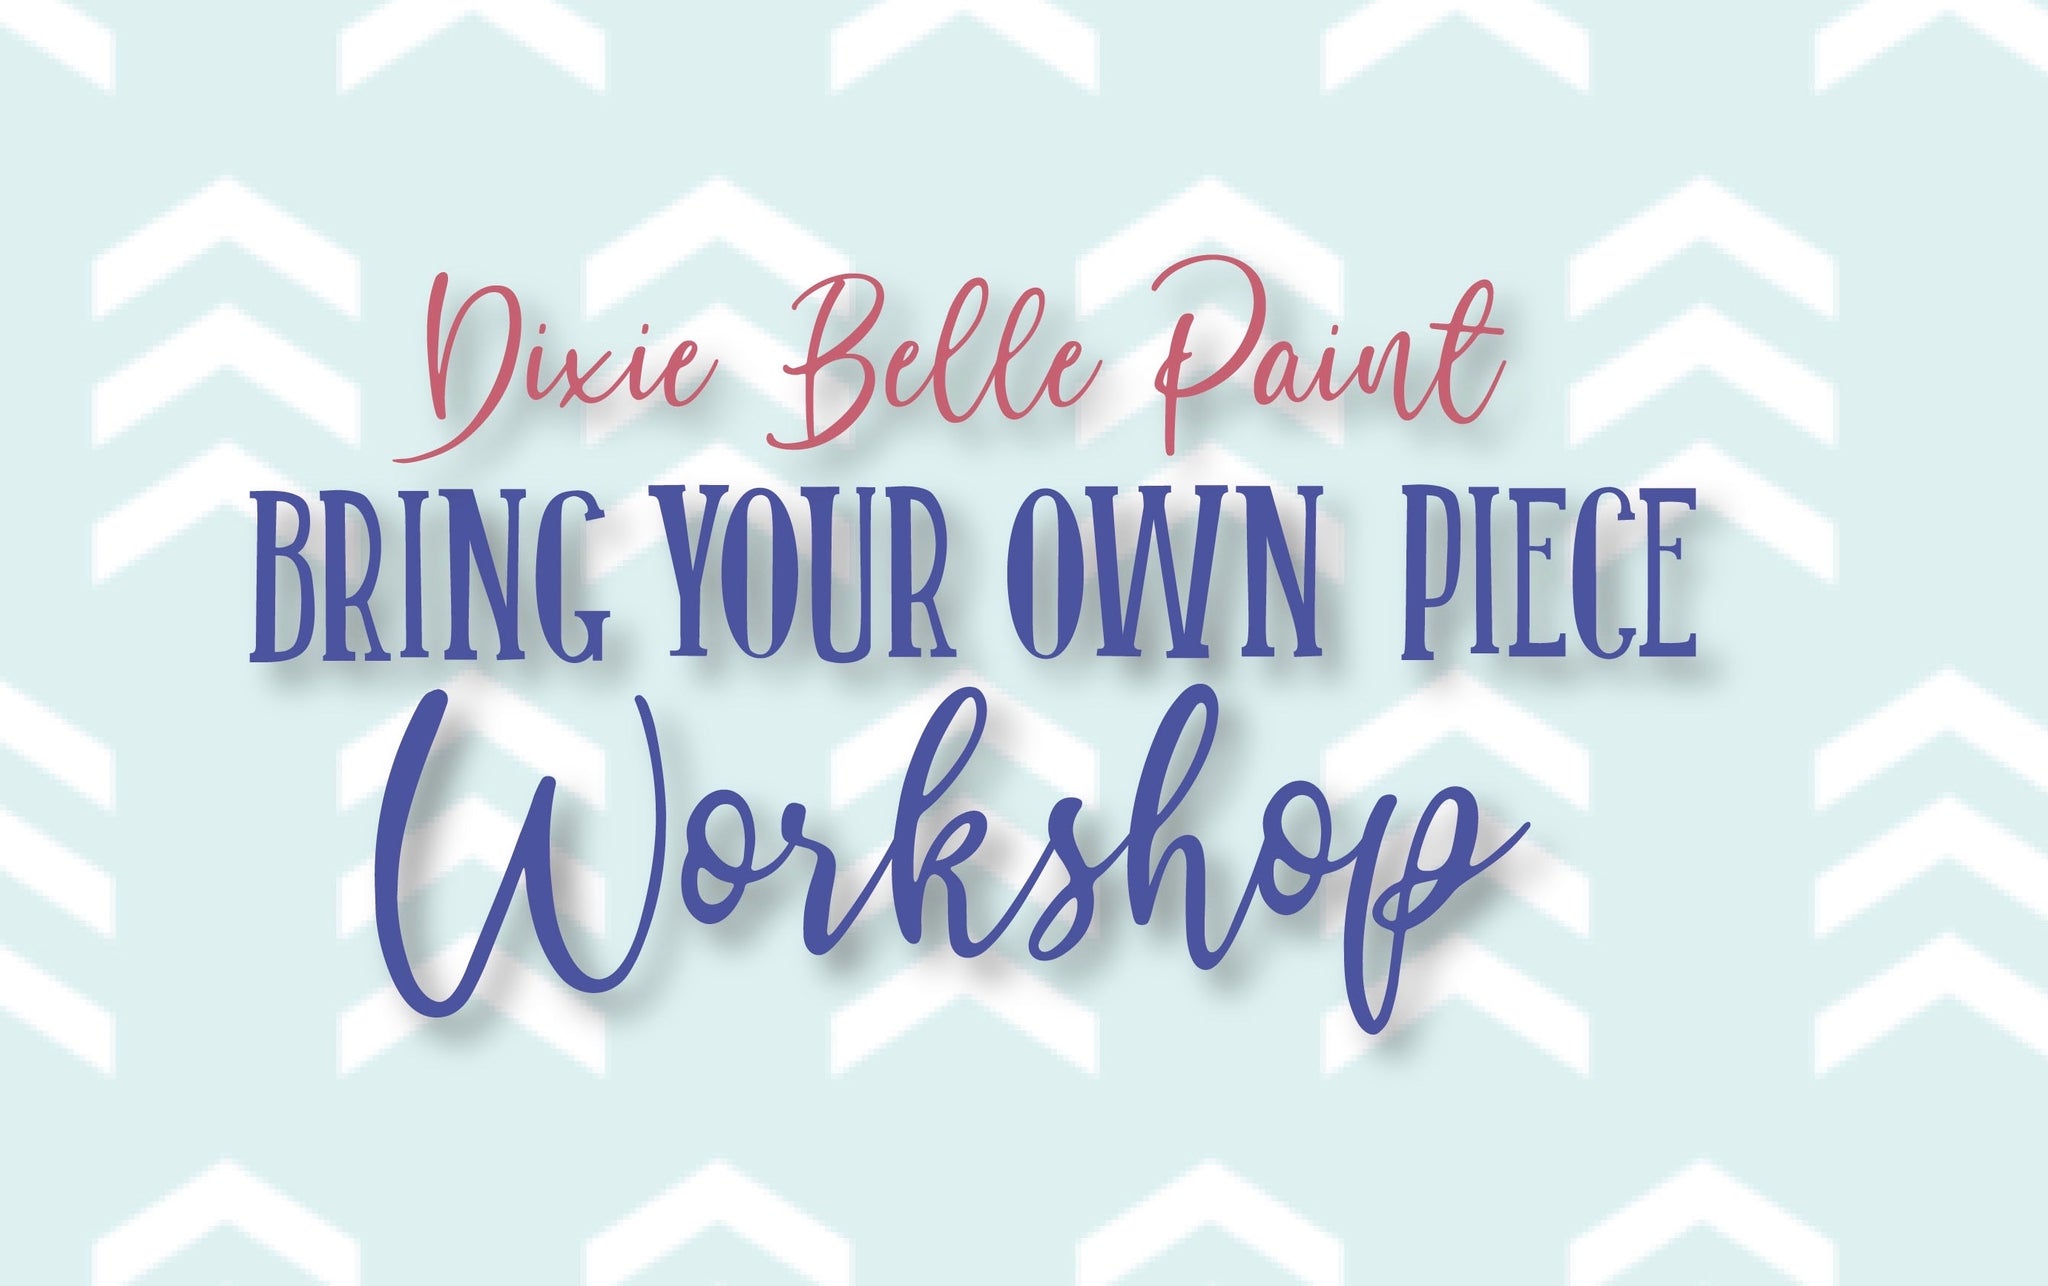 Dixie Belle bring your own piece class